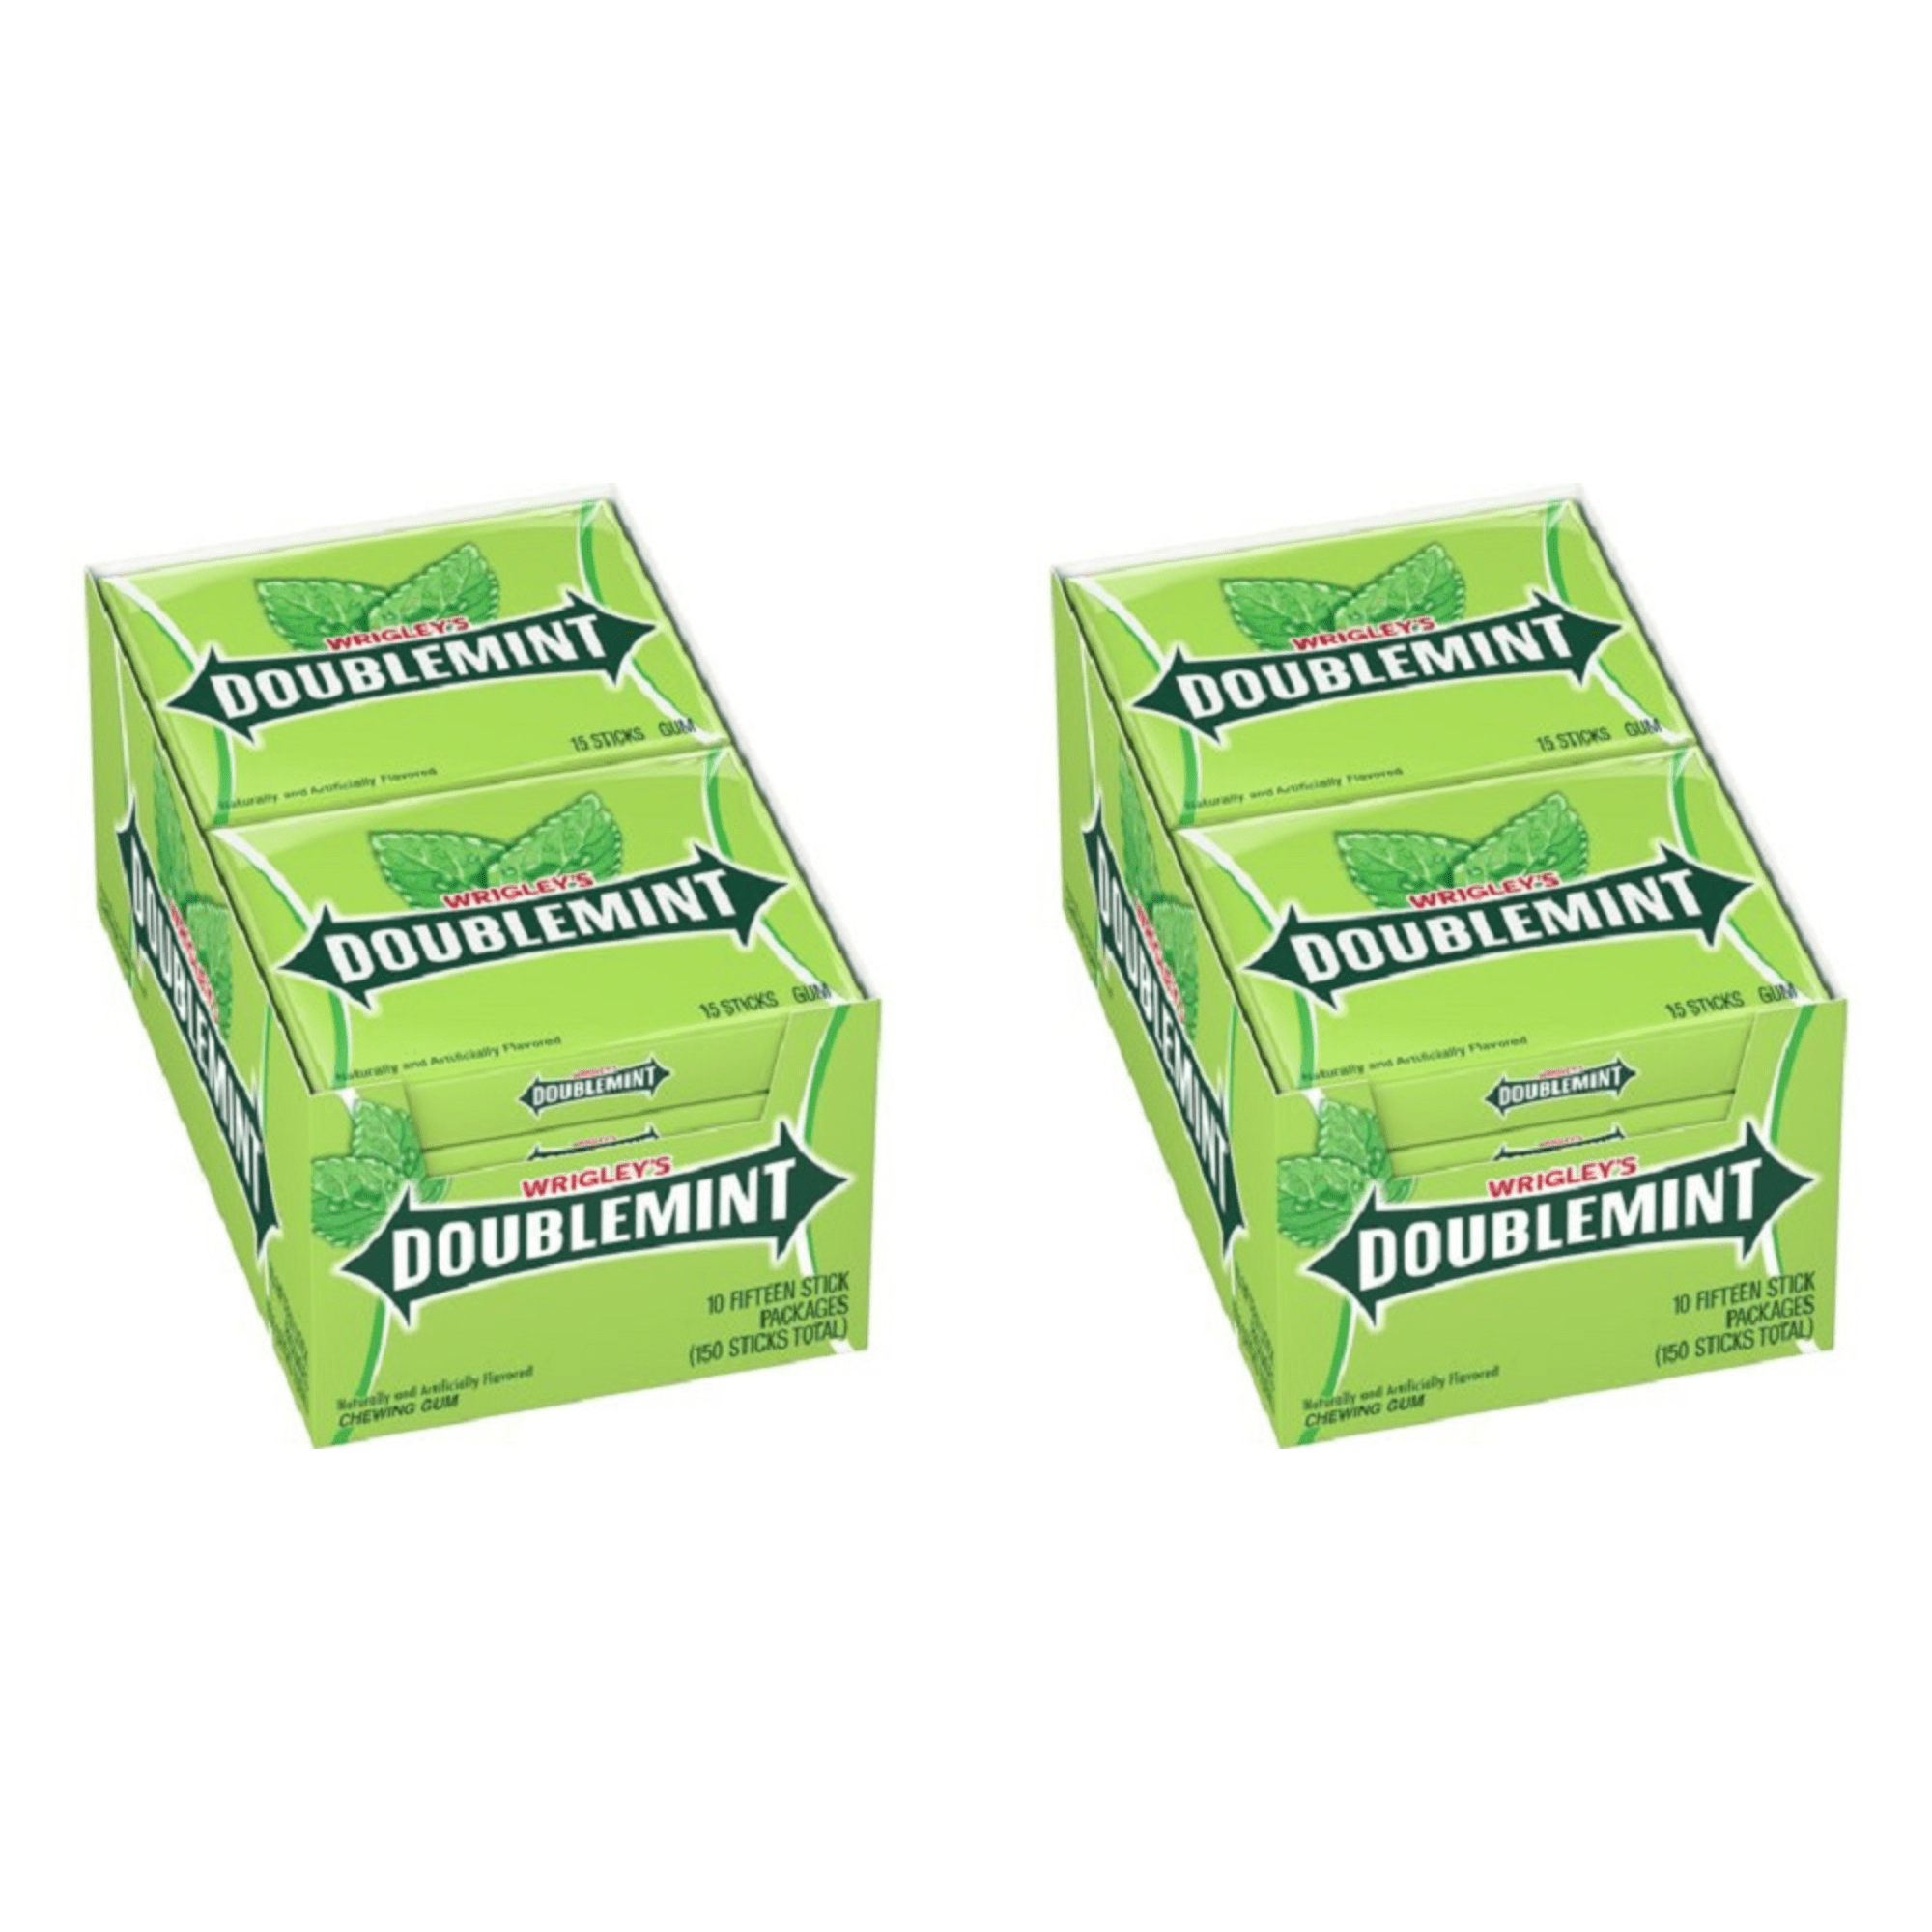 Wrigley’s Airwaves Melon Menthol Chewing Gum